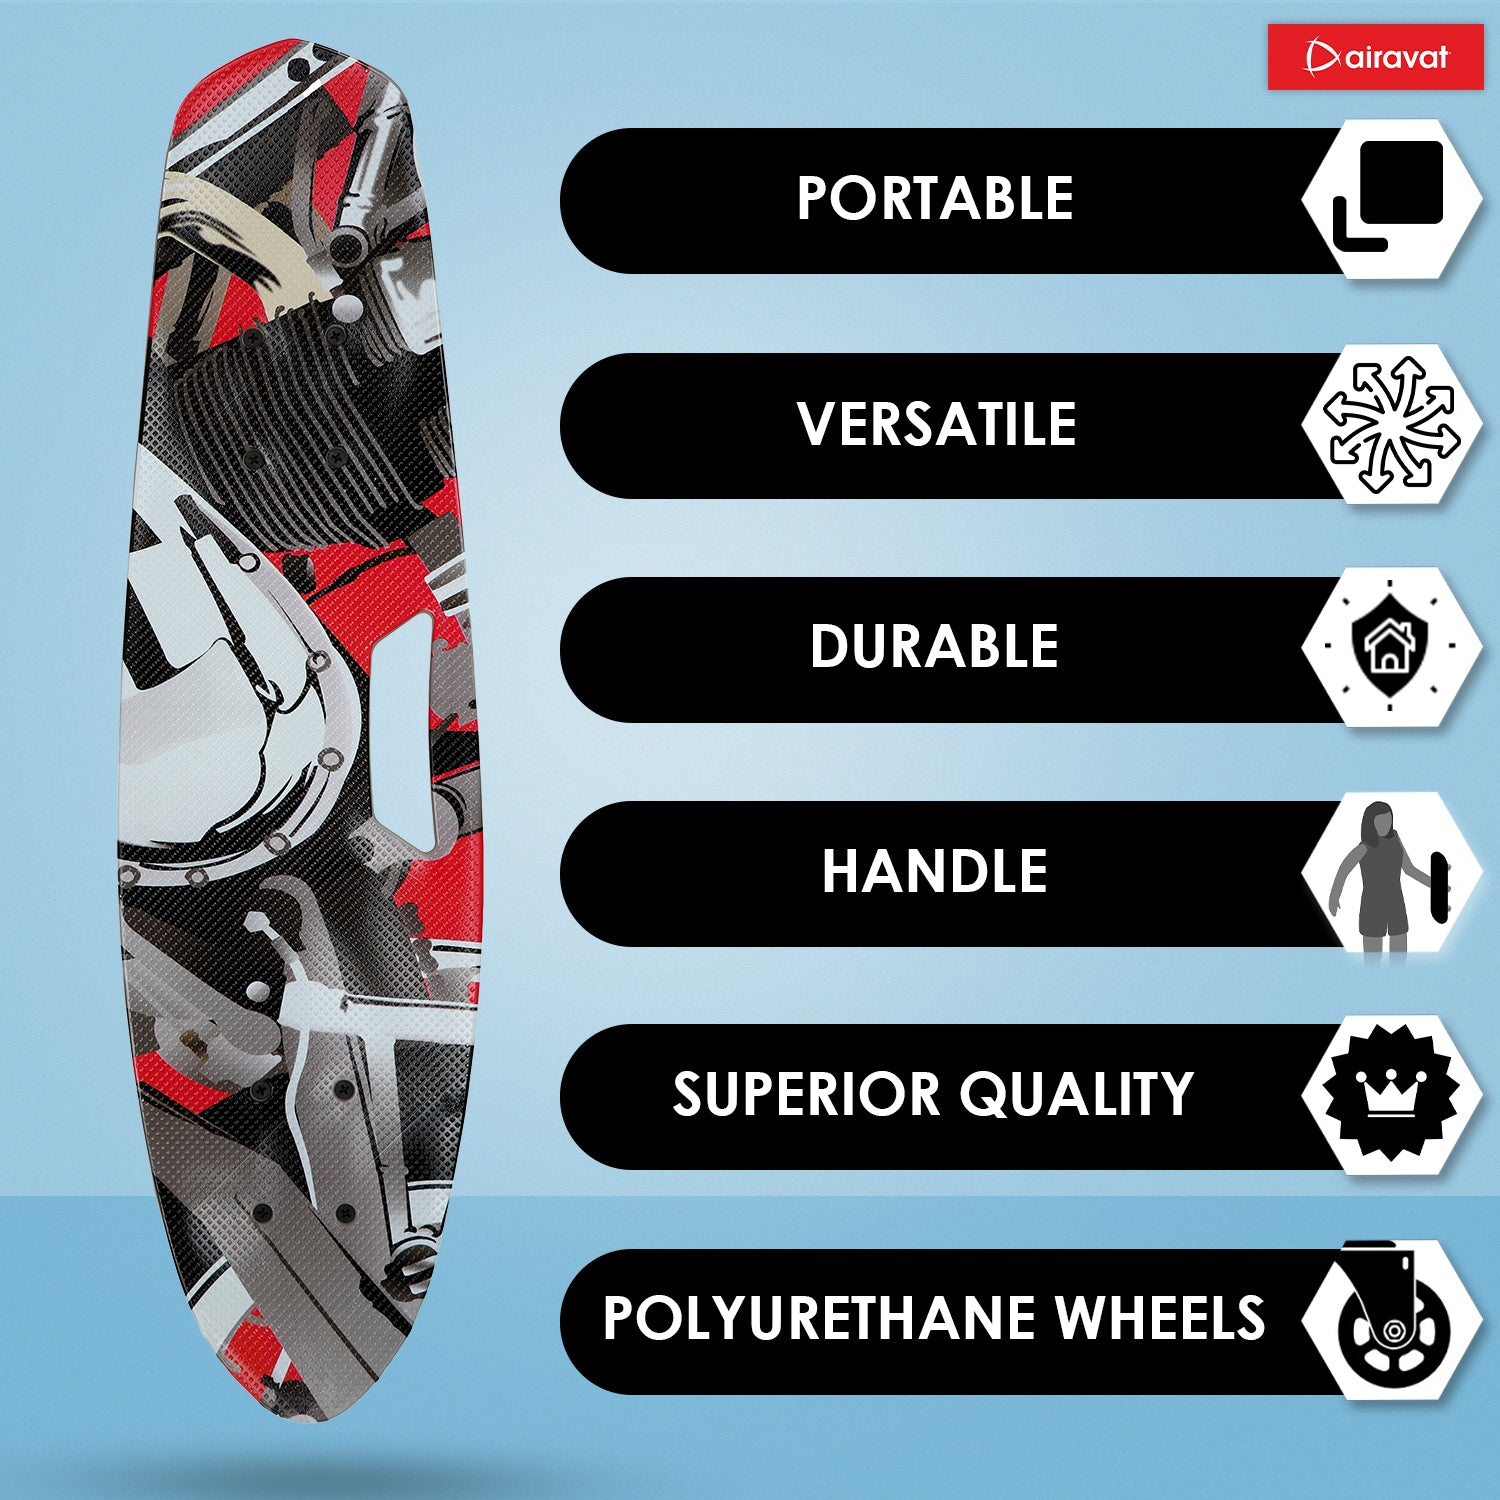 7818-skateboard-style3-more-features